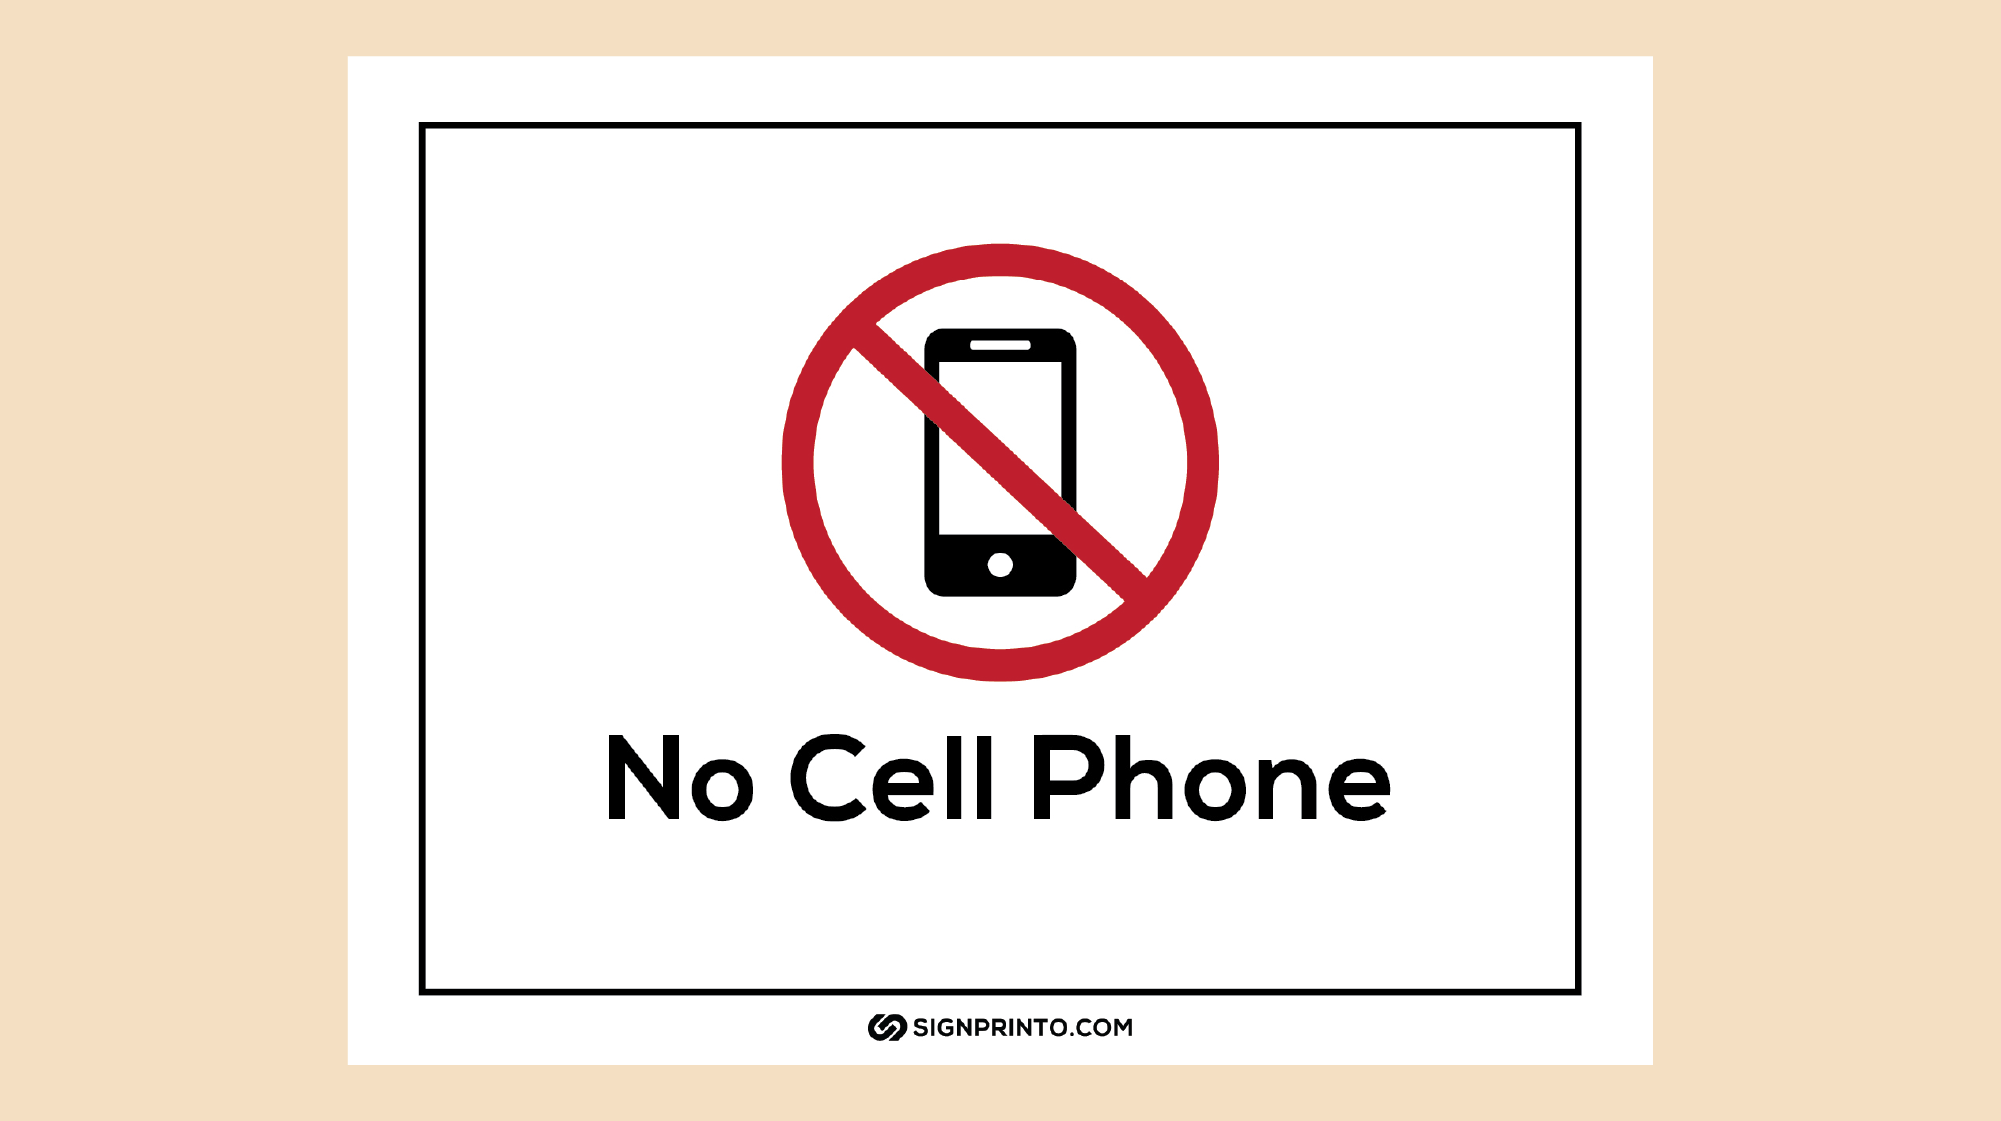 No cell phone sign with phone cross